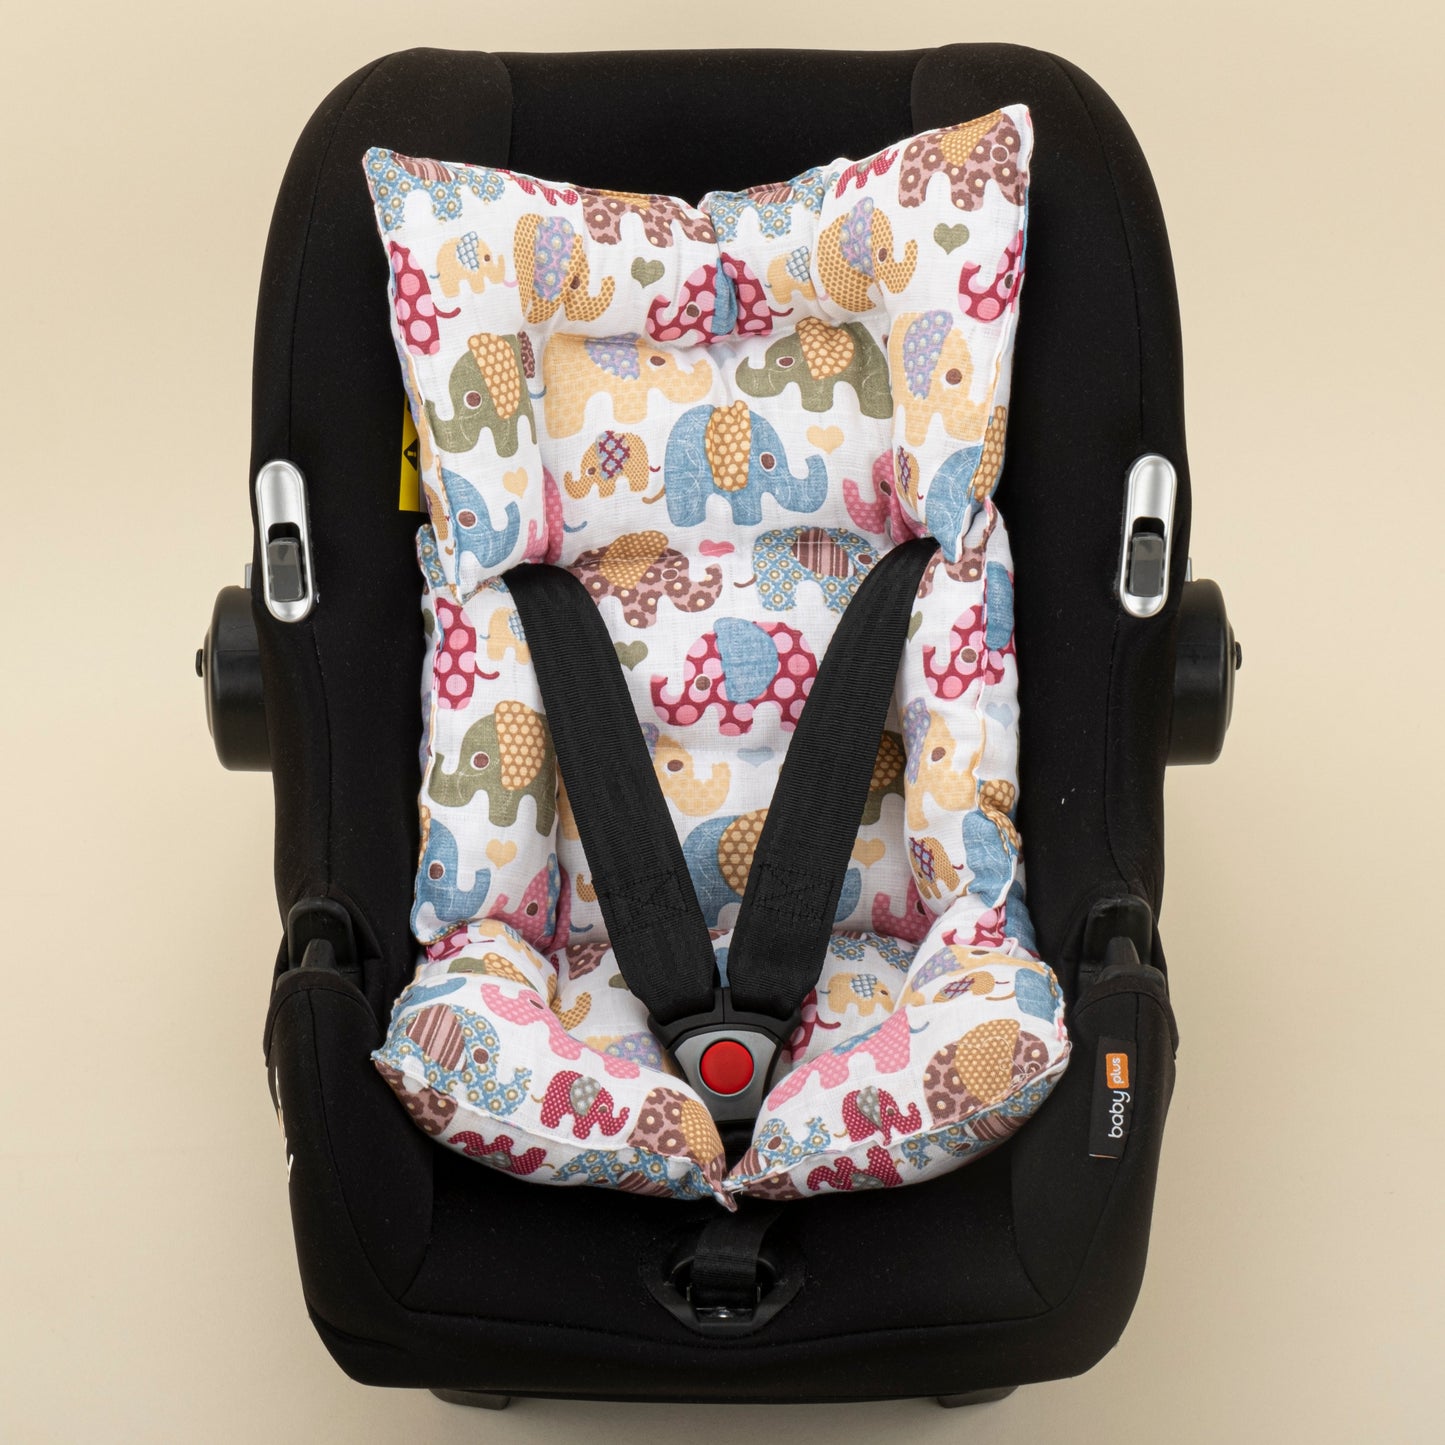 Stroller Cover Set - Double Side - Cream Muslin - Colored Elephants